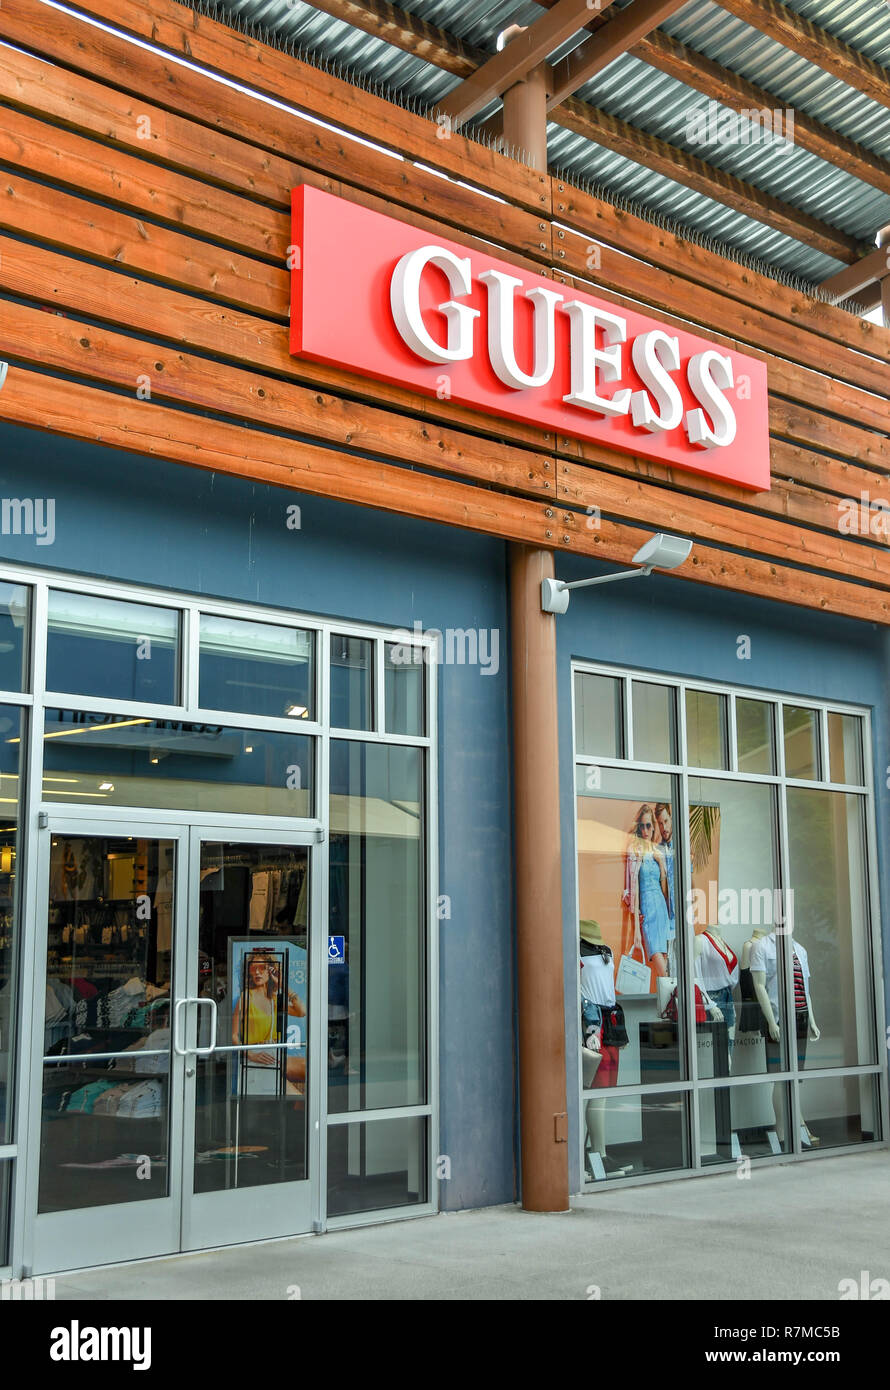 SEATTLE, WA, USA - JUNE 2018: Exterior view of the Guess store at the Premium Outlets shopping mall near Seattle. Stock Photo